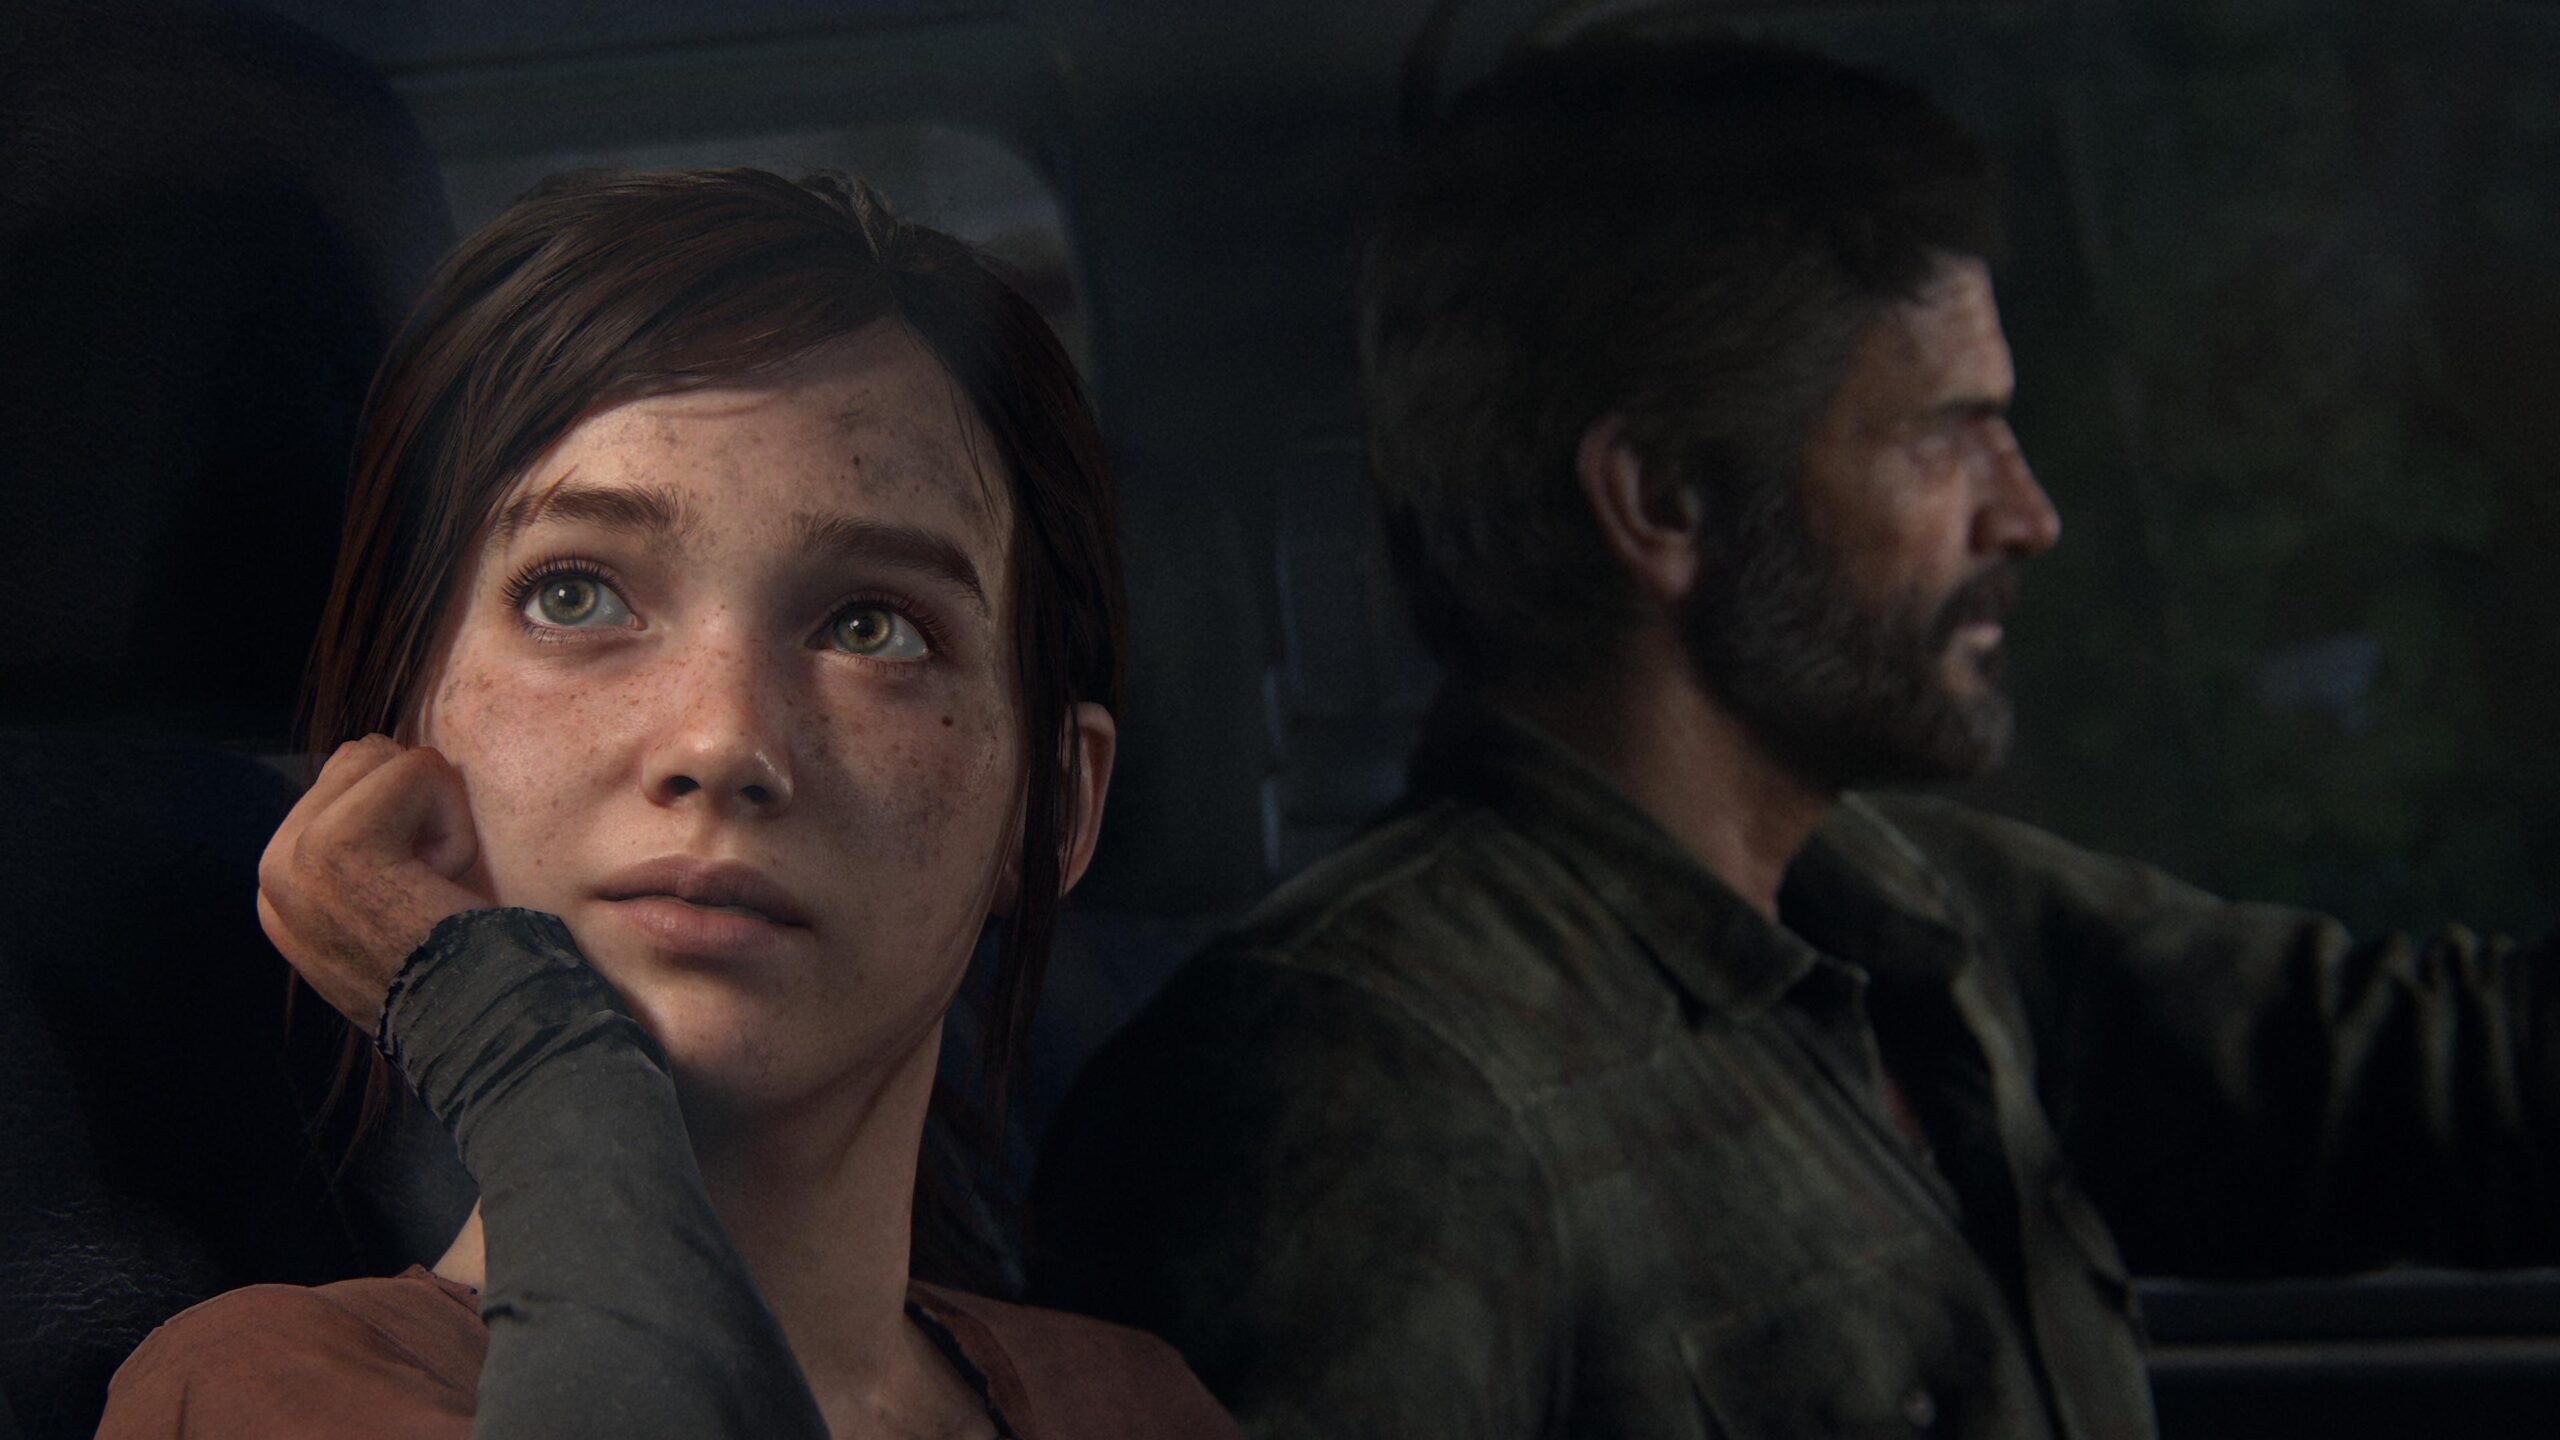 7 Reasons Why The Last of Us Part 1 is More Than a Remaster